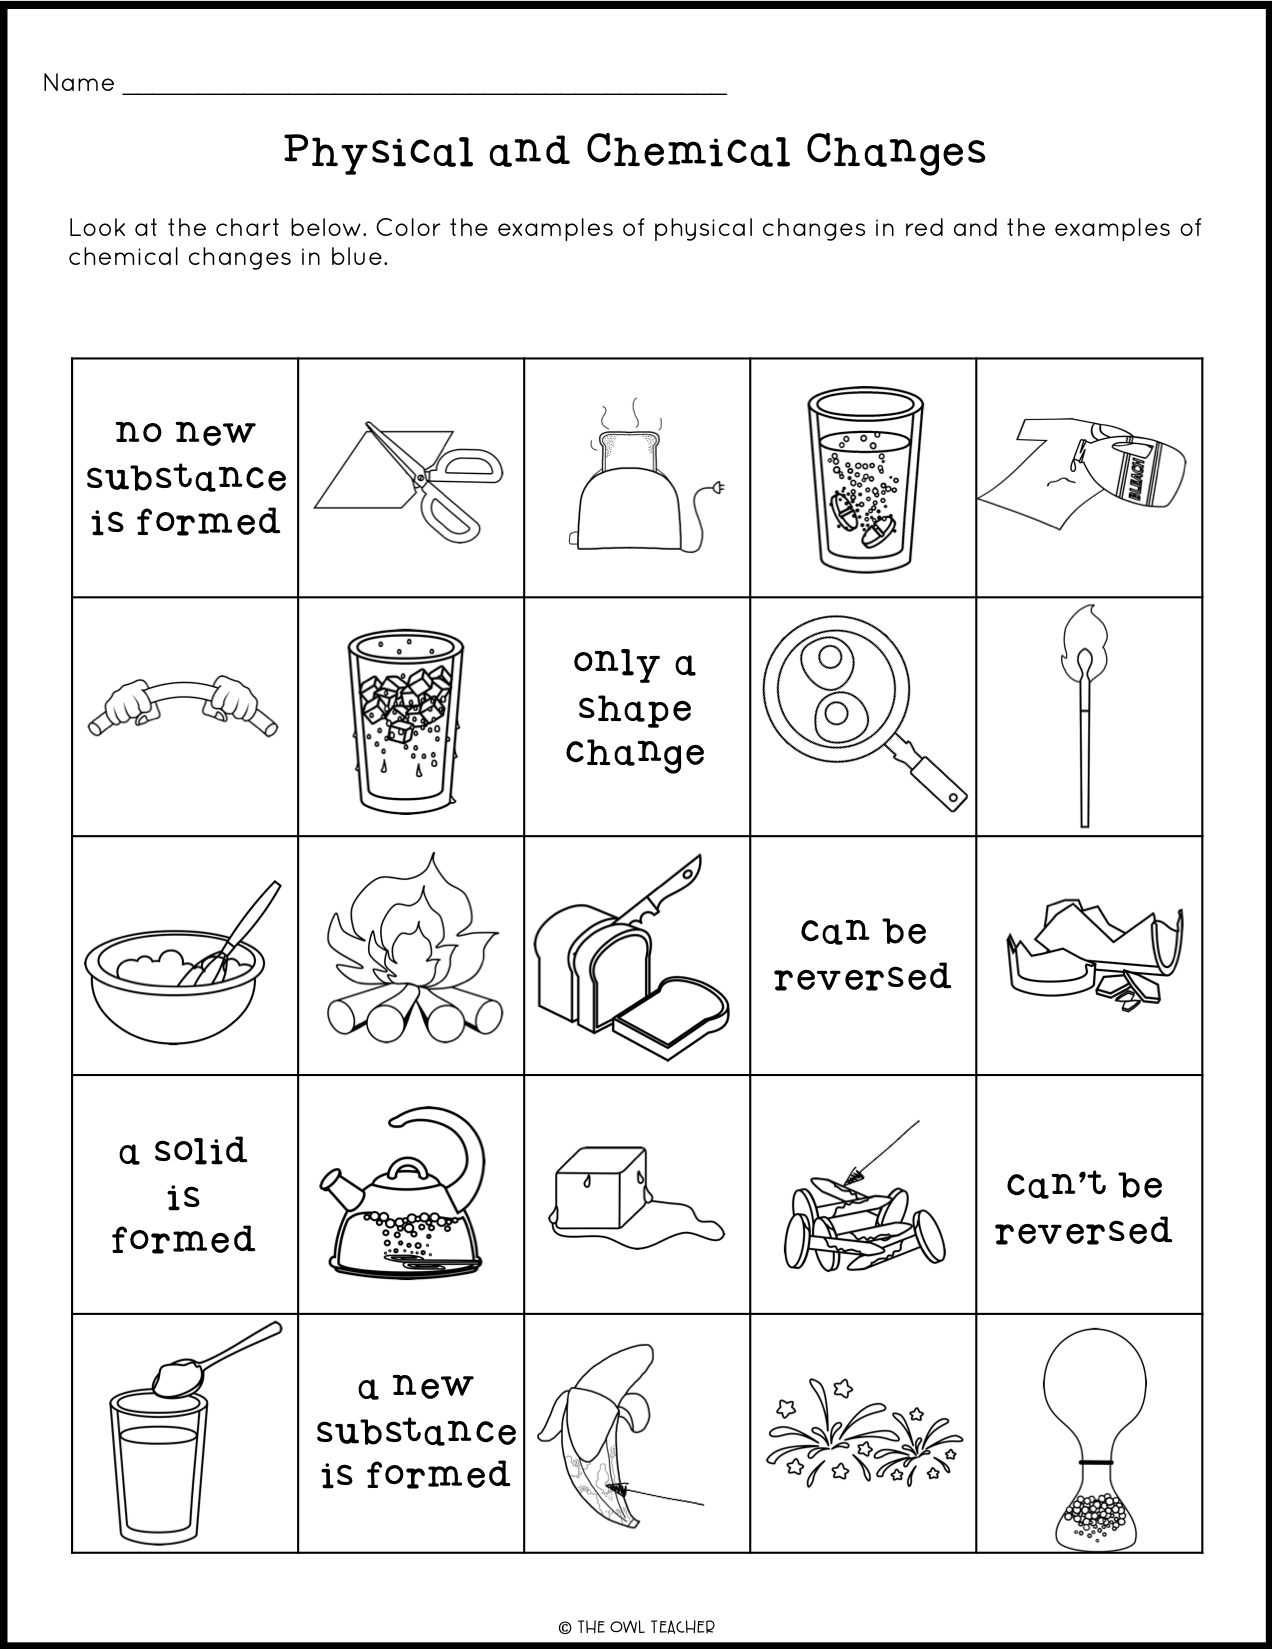 Physical and Chemical Changes Craftivity - The Owl Teacher Throughout Physical And Chemical Changes Worksheet